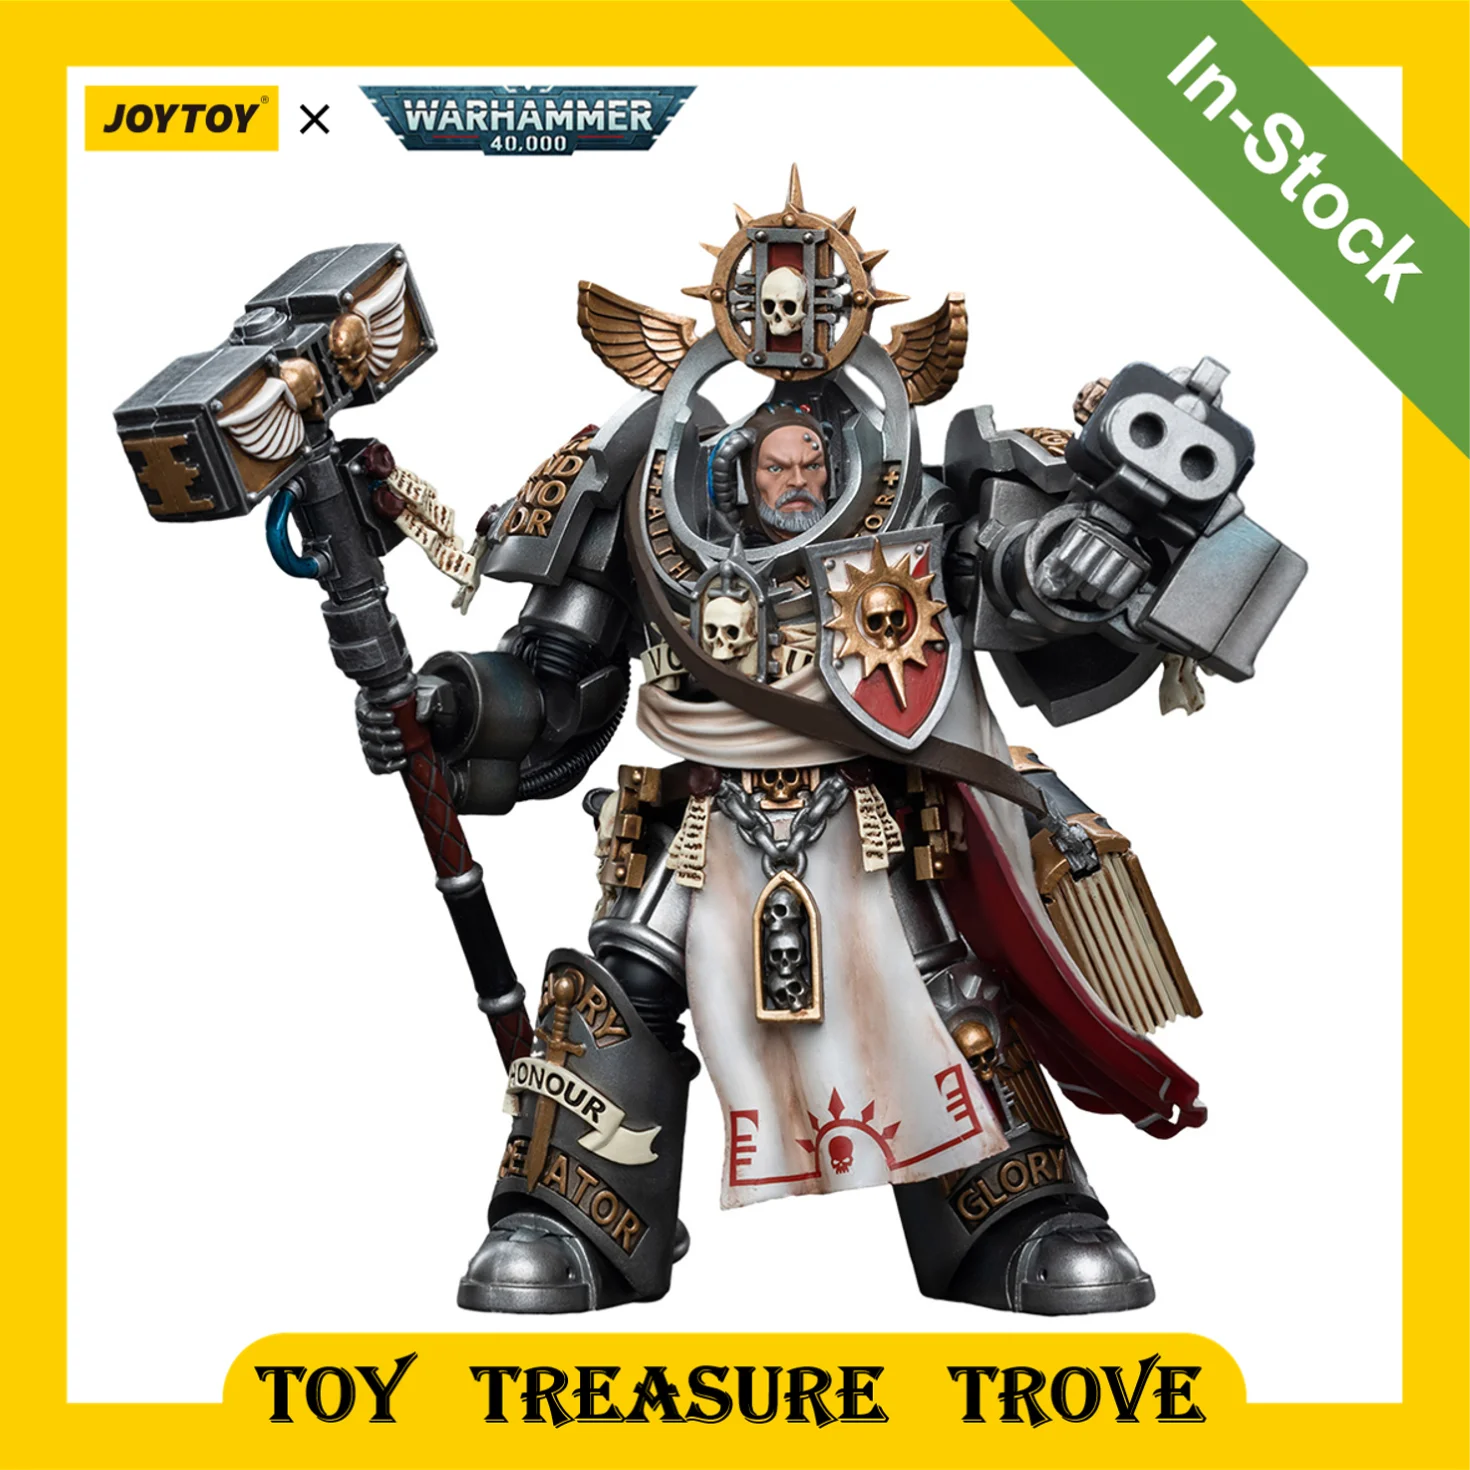 

[In-Stock] JOYTOY Warhammer 40k 1/18 Action Figures Grey Knights Grand Master Voldus Anime Military Model Toy For Gift